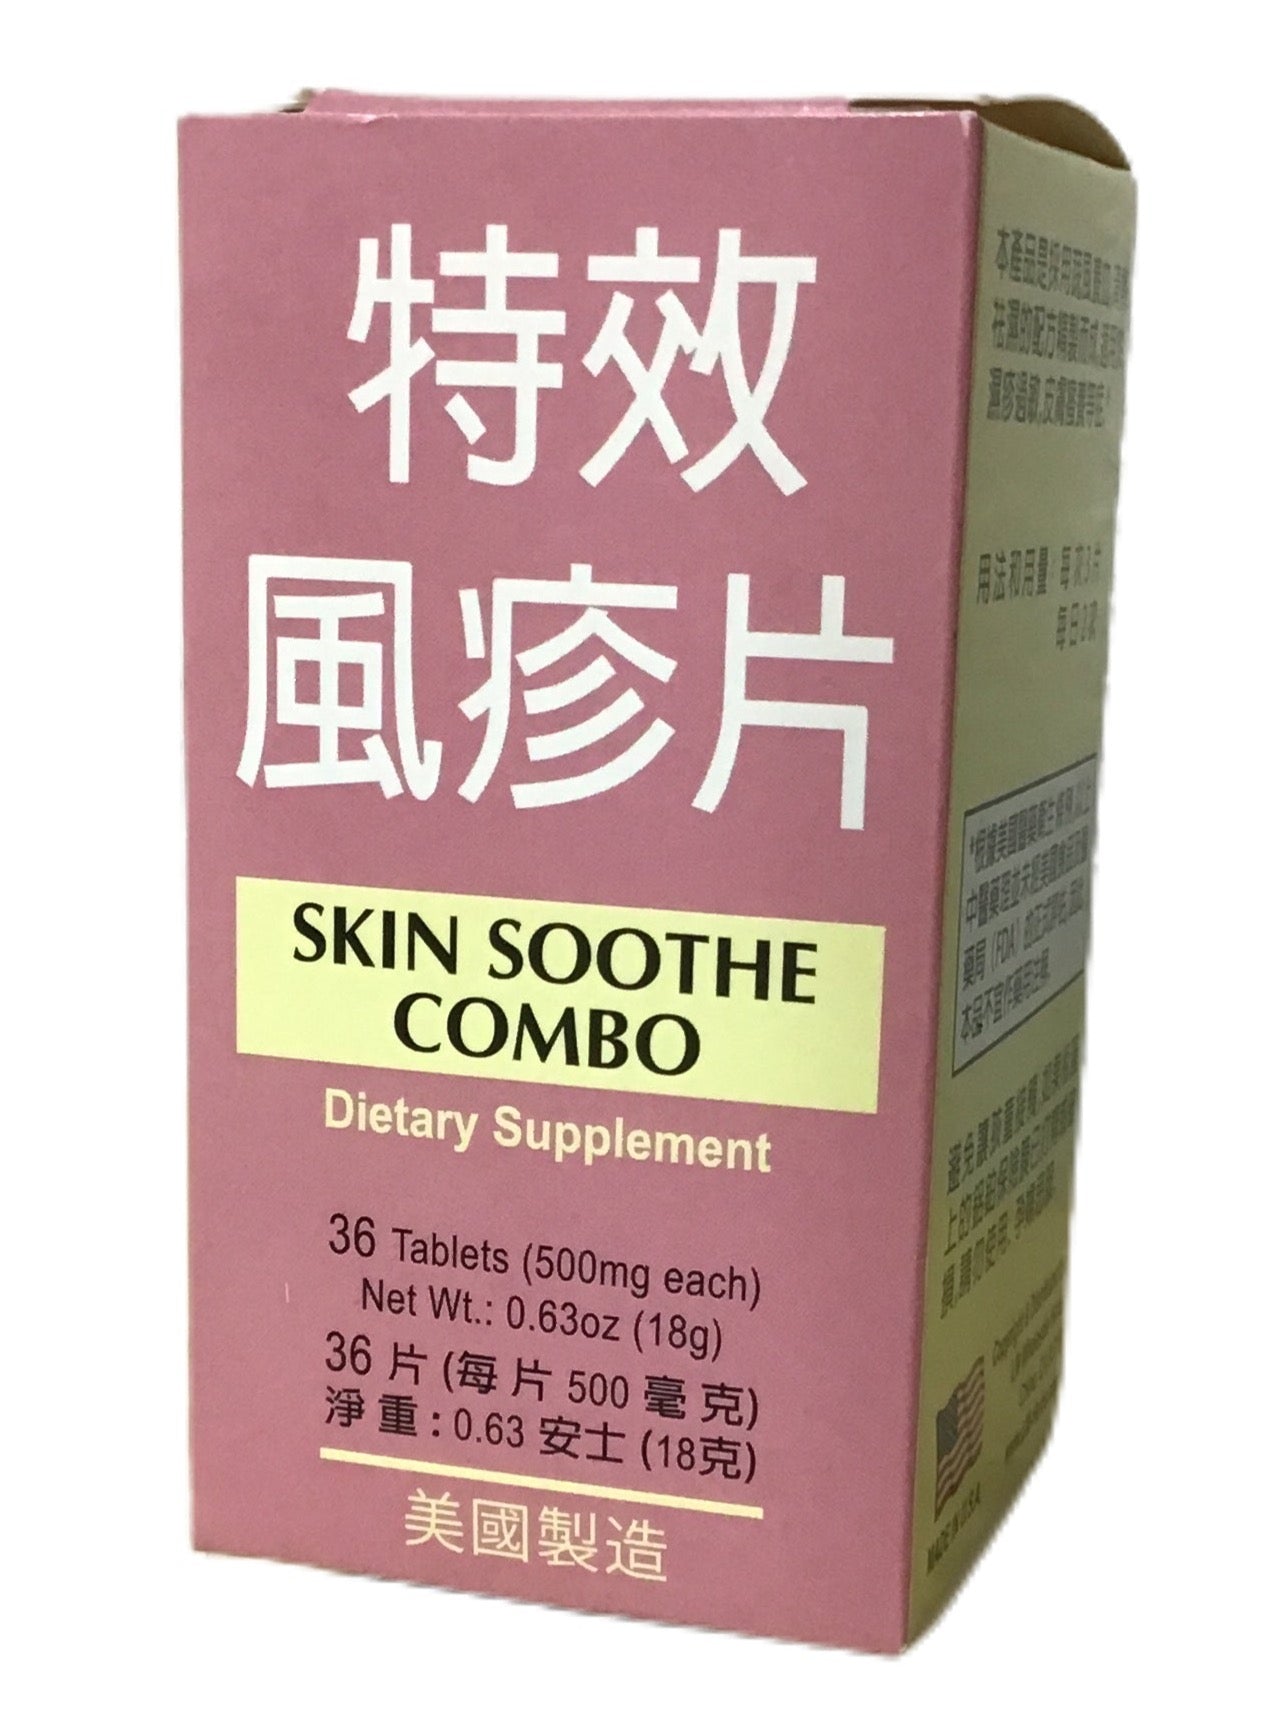 Skin Soothe Combo/Itch Relief (36 Tablets) 老威牌 特效風疹片